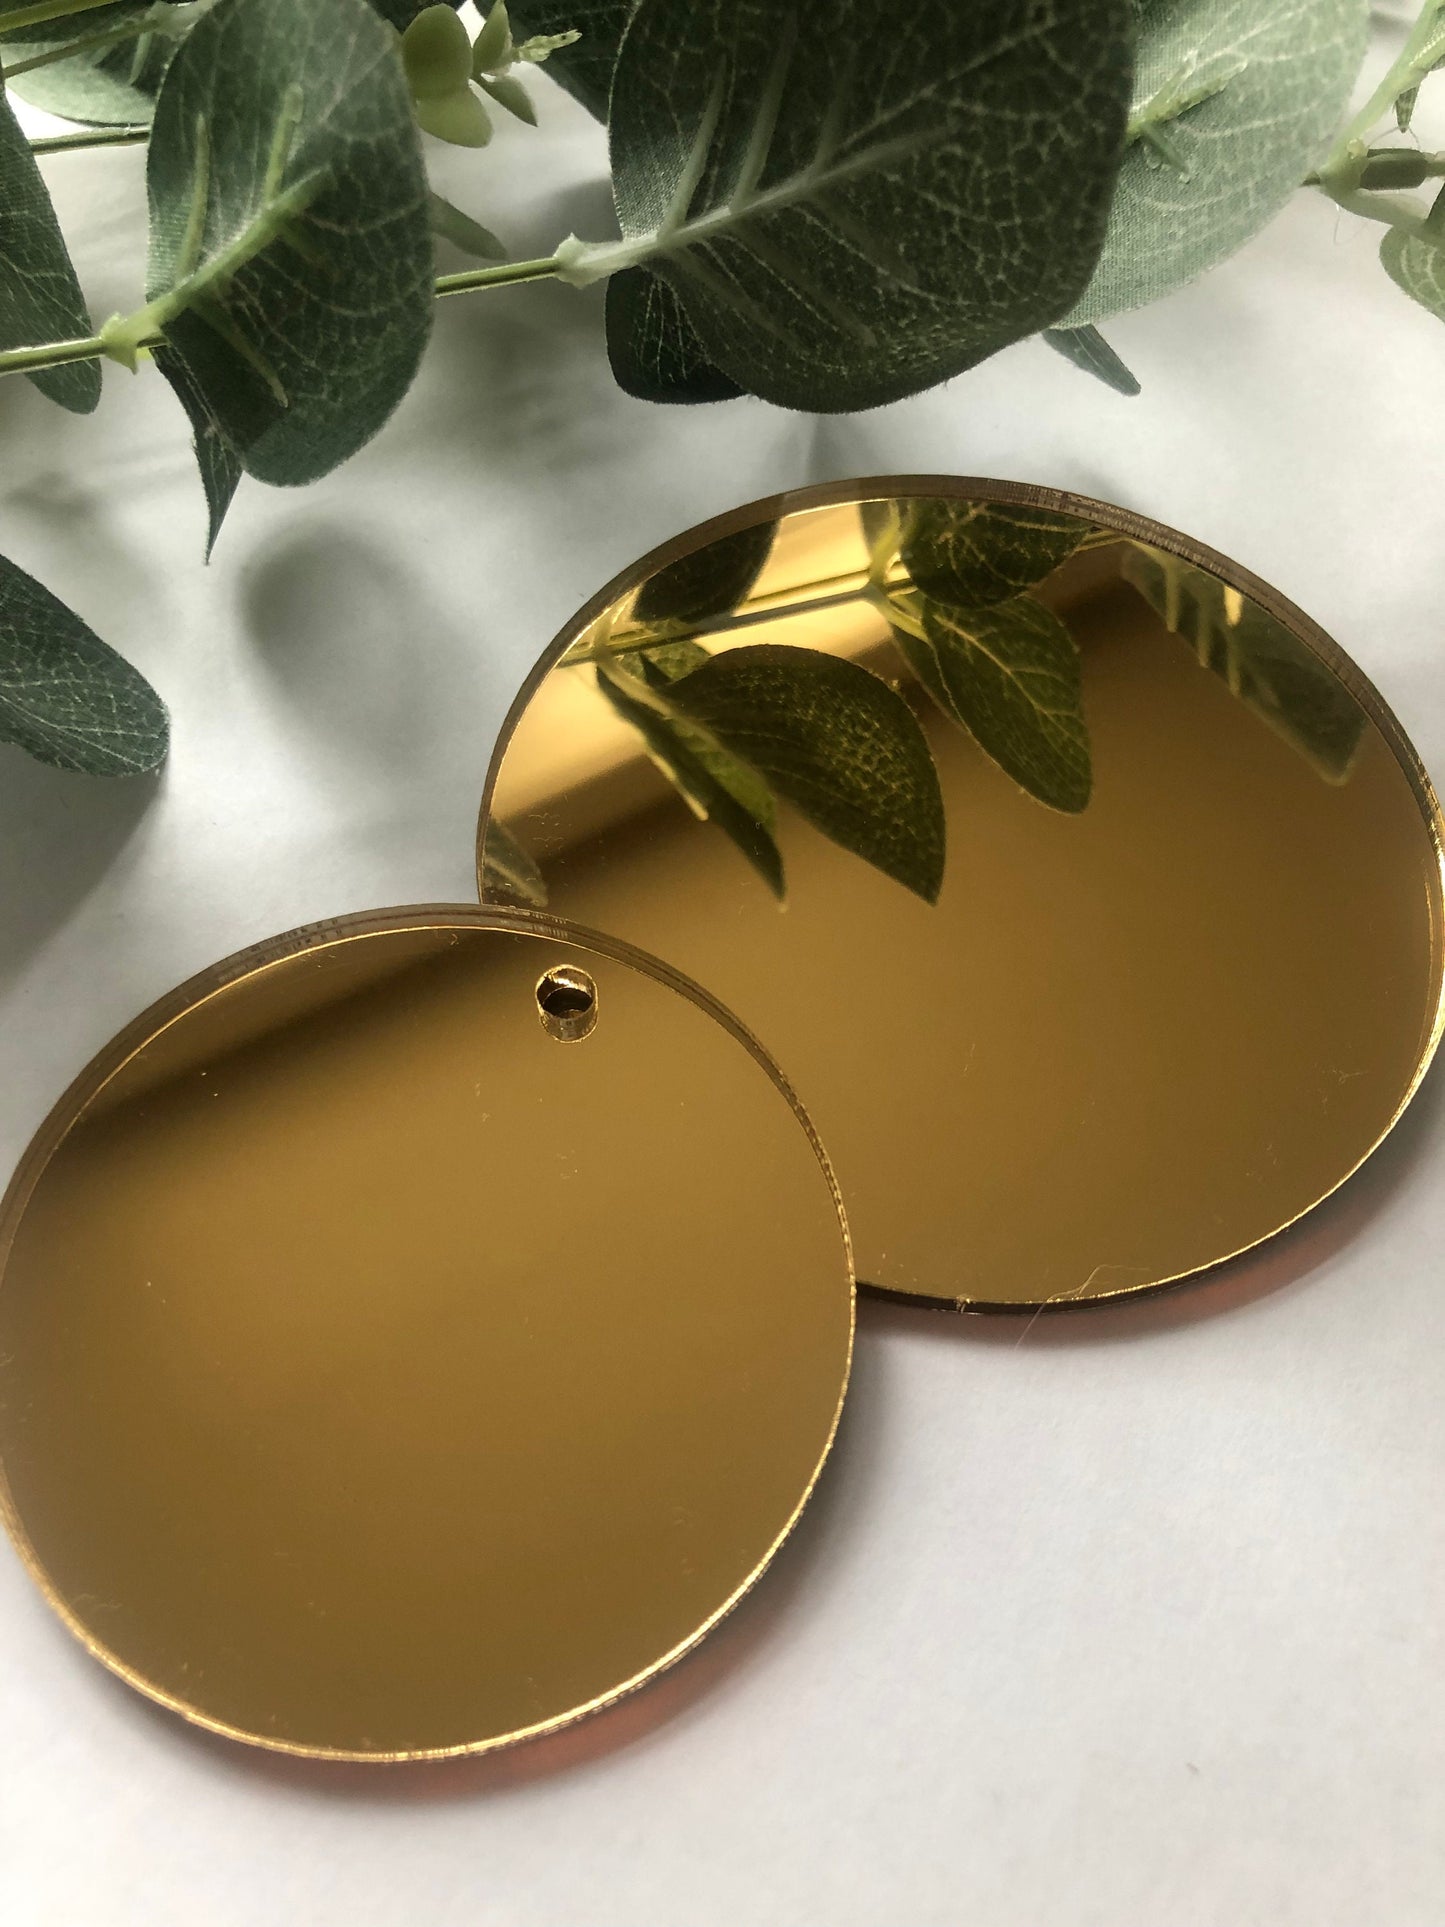 10 x Mirrored Acrylic Circle Blank. Rose Gold, Gold Or Silver. Avail With Or Without Hanging Hole. Perfect for Christmas or Weddings.